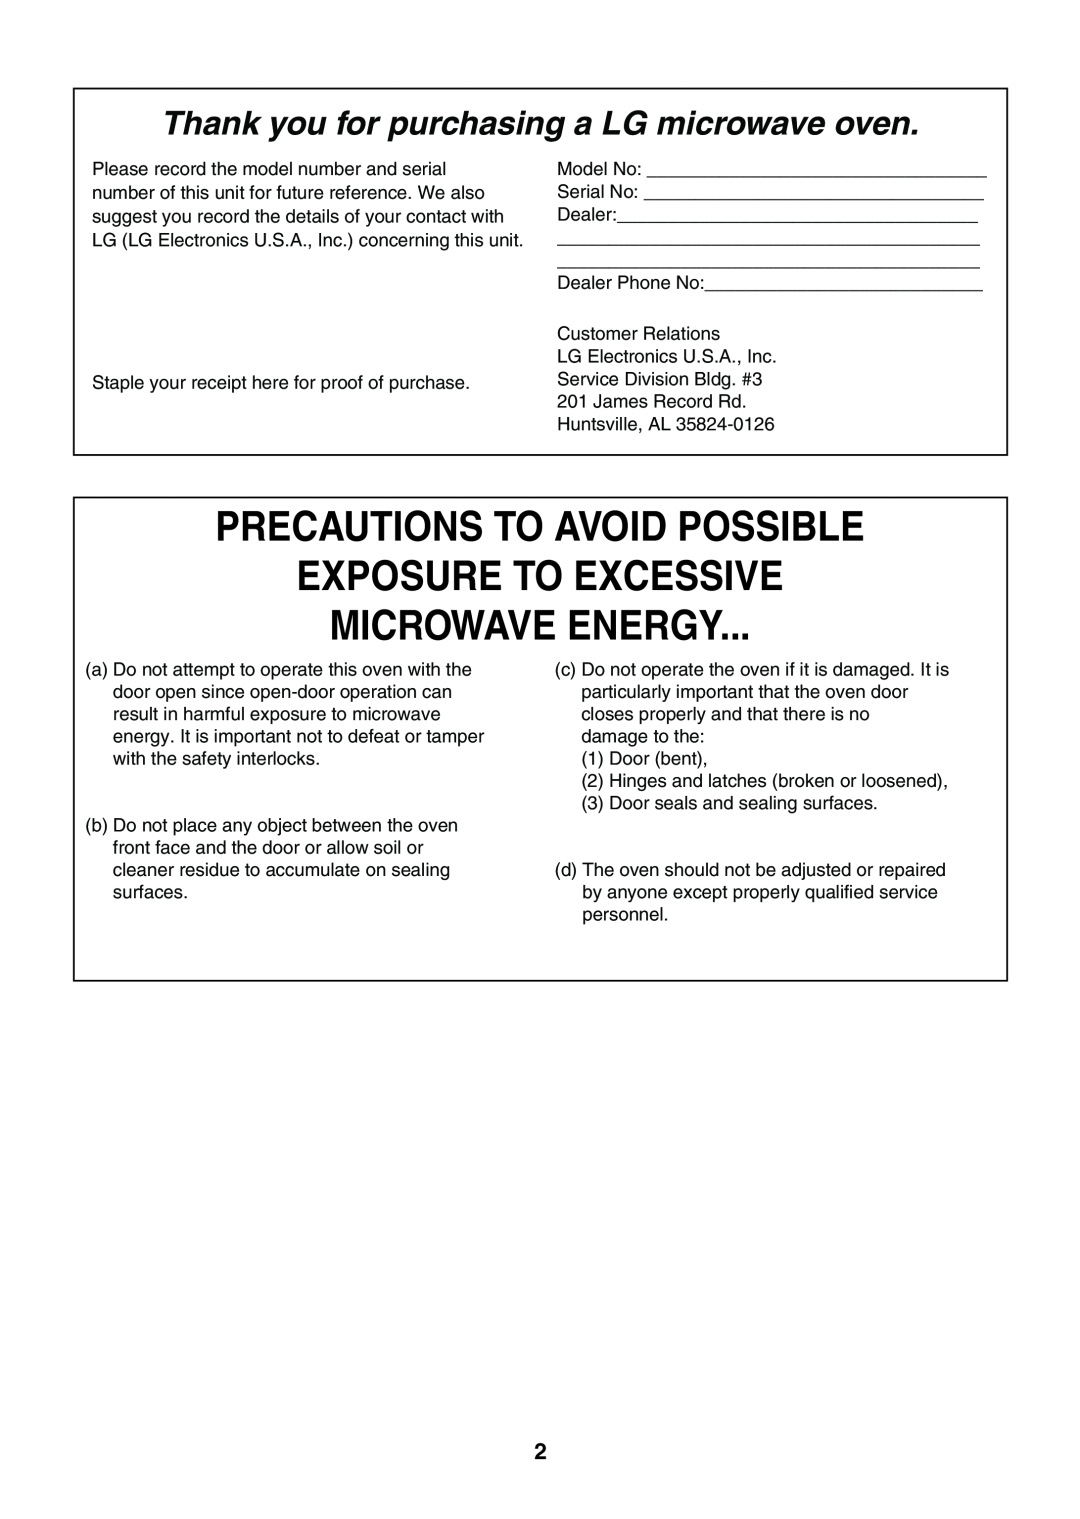 LG Electronics LMVM2055SB owner manual Precautions To Avoid Possible Exposure To Excessive Microwave Energy 